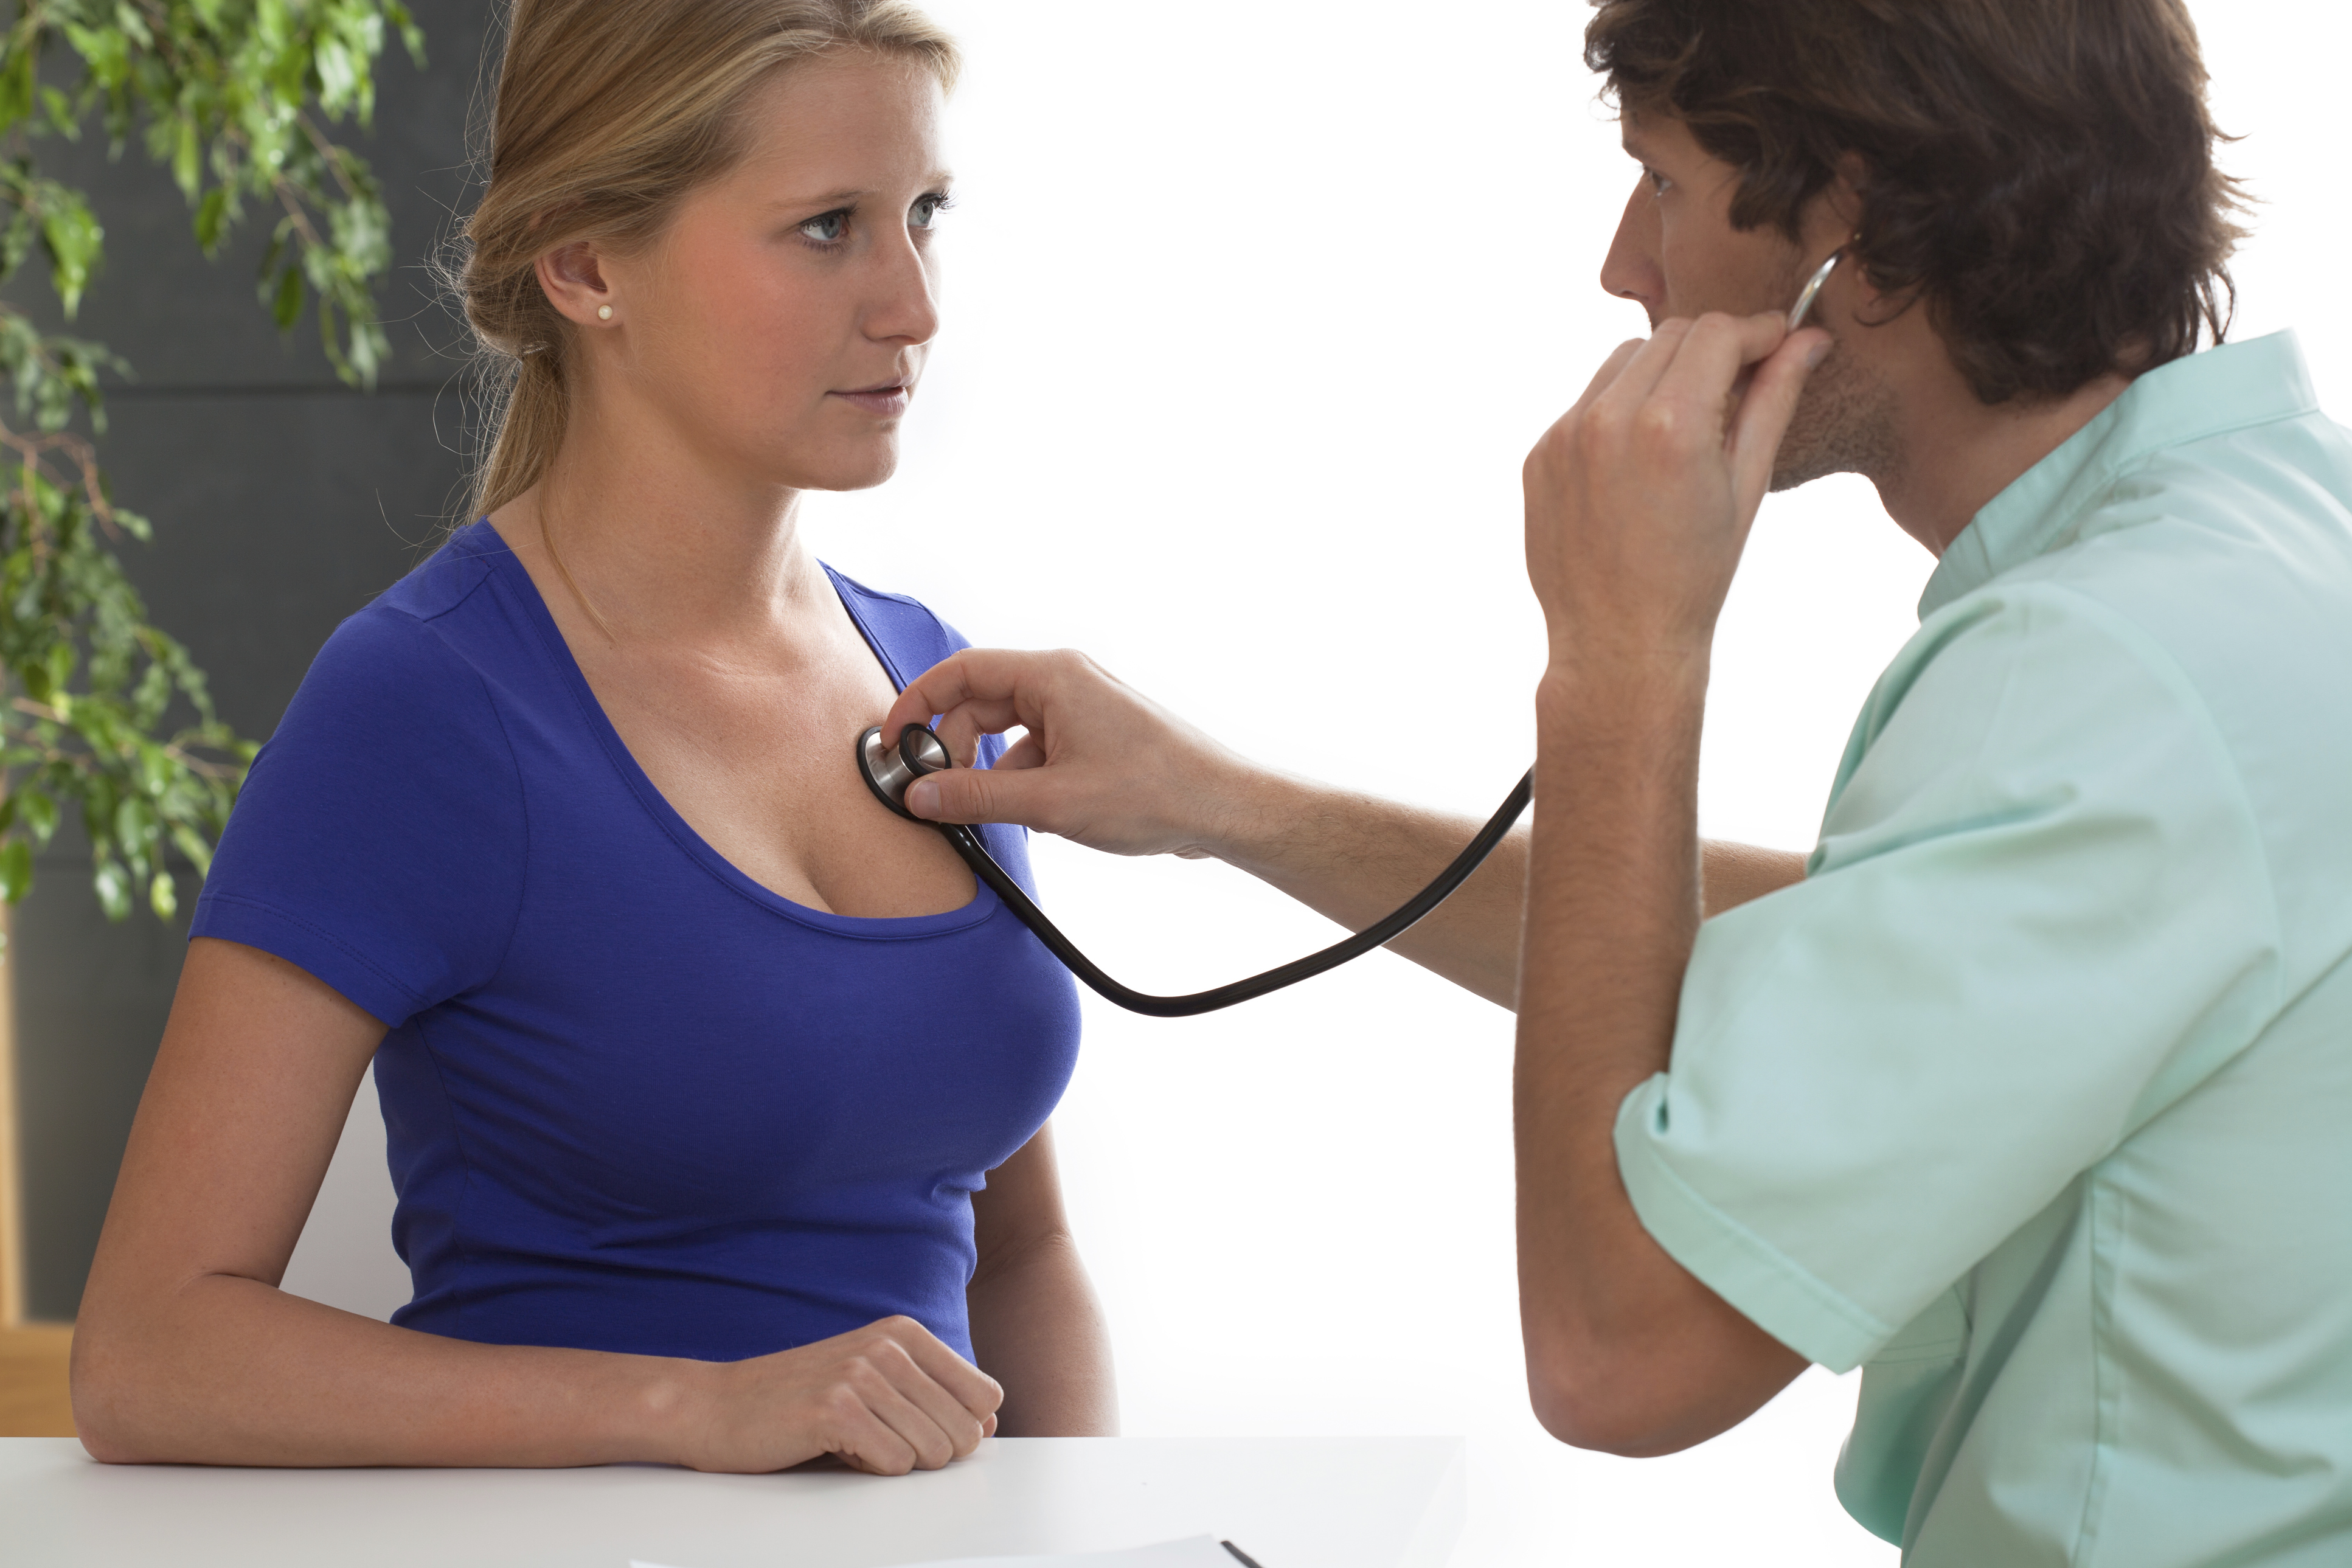 Women, especially younger ones, need a wake-up call about heart health | WTOP3867 x 2578